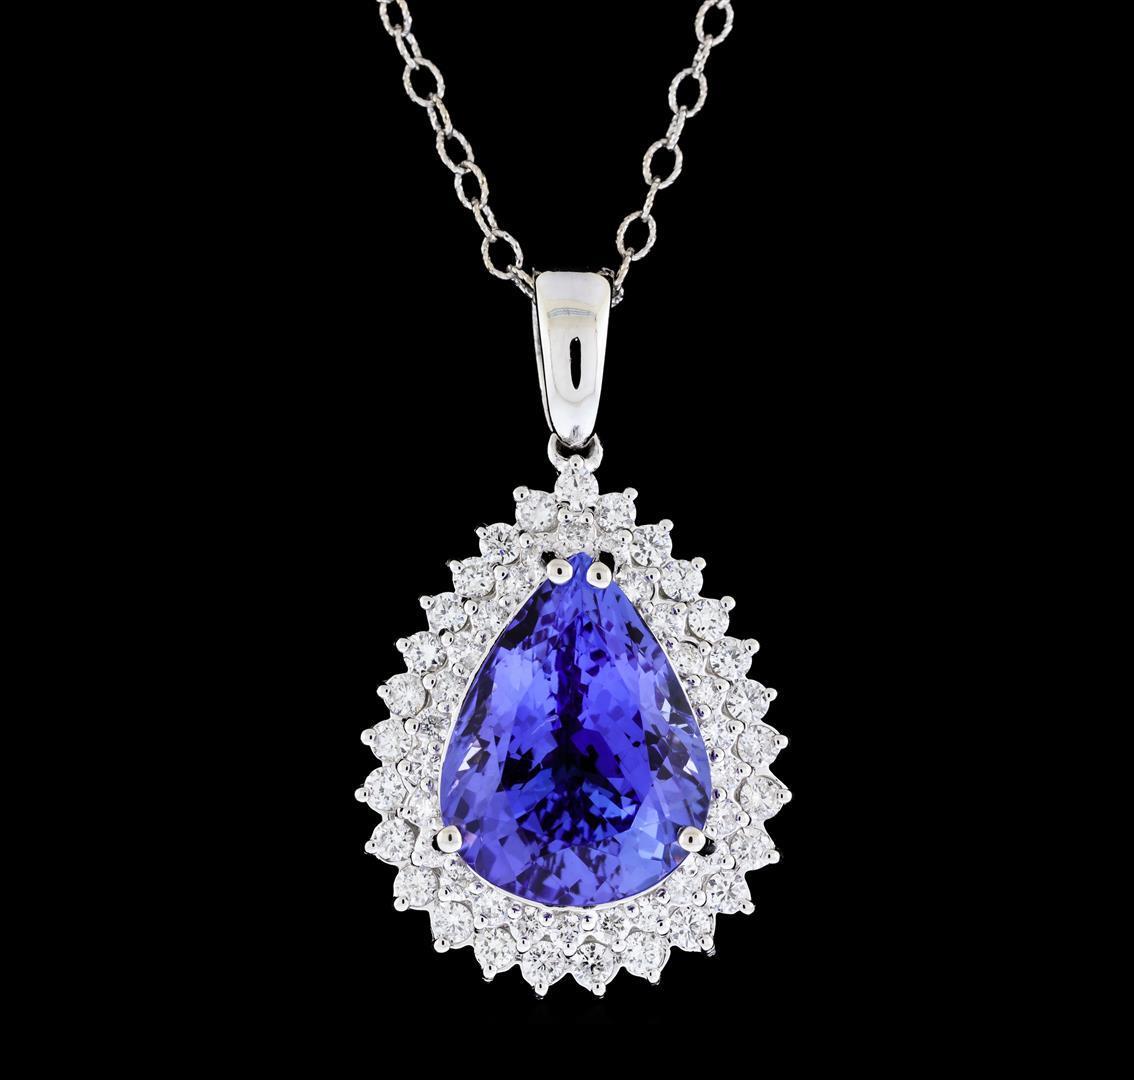 10.79 ctw Tanzanite and Diamond Pendant With Chain - 14KT White Gold